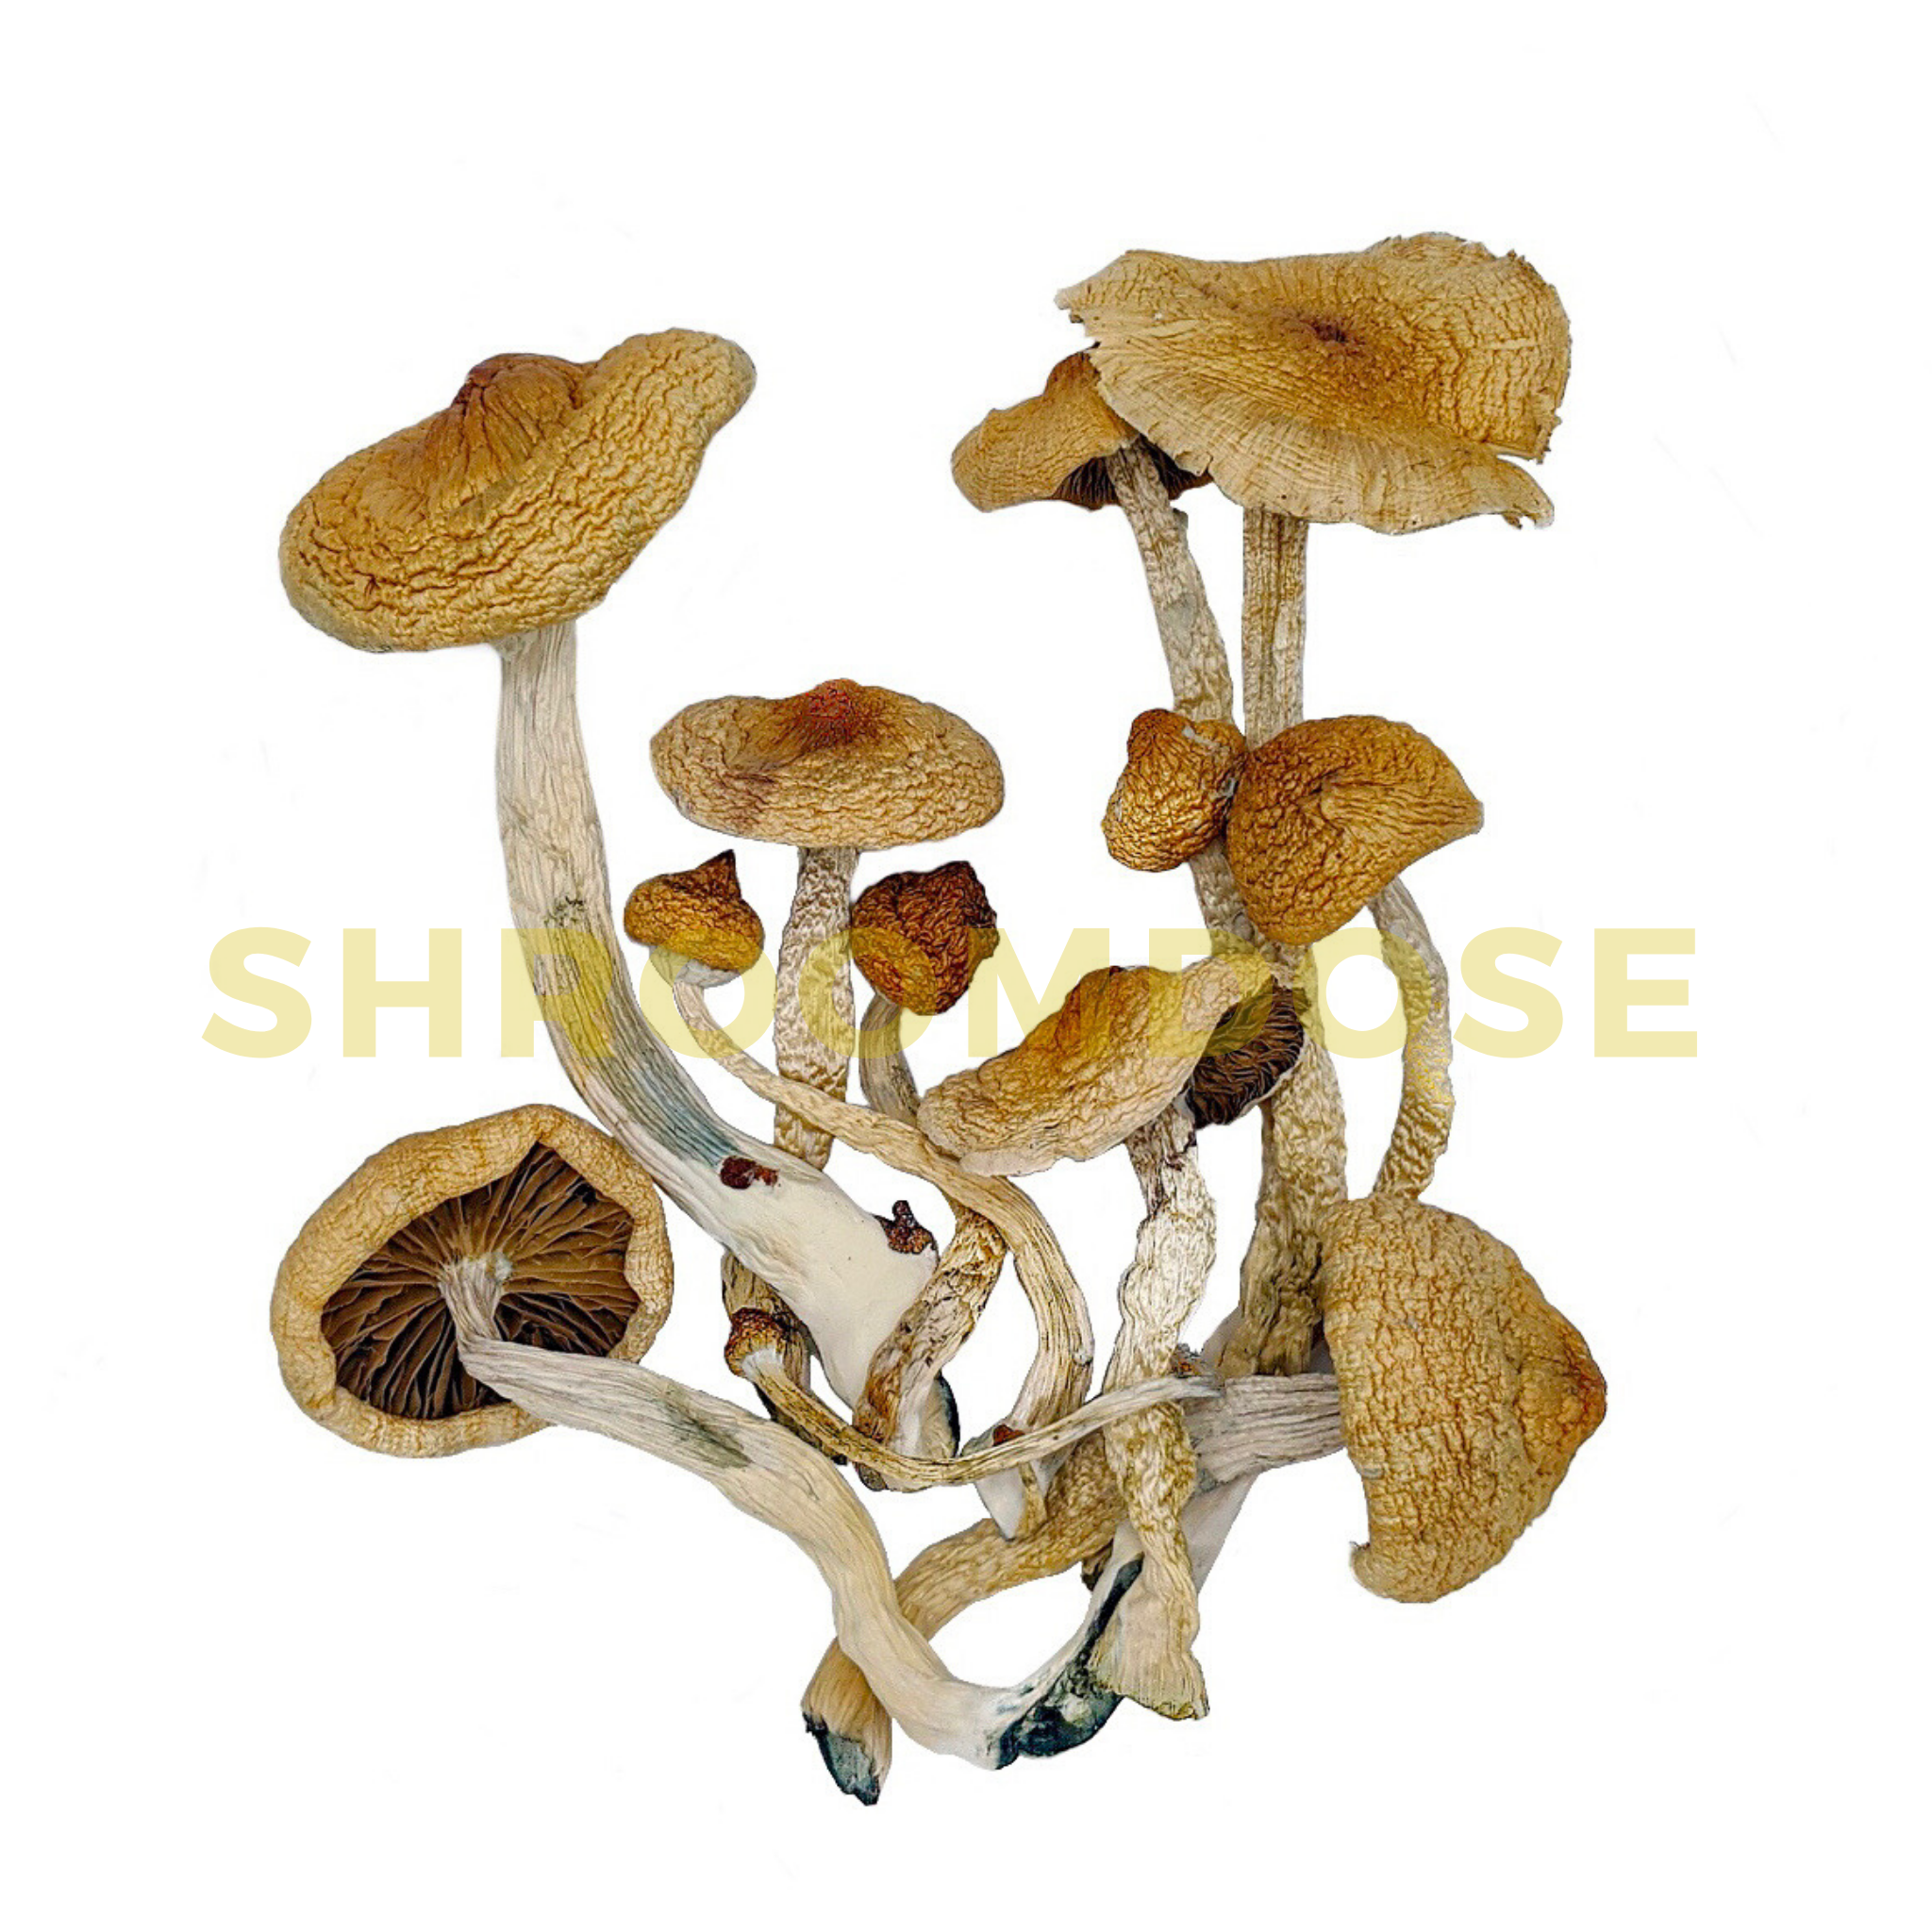 Shrooms Canada: Where to Safely Buy Golden Teachers and More